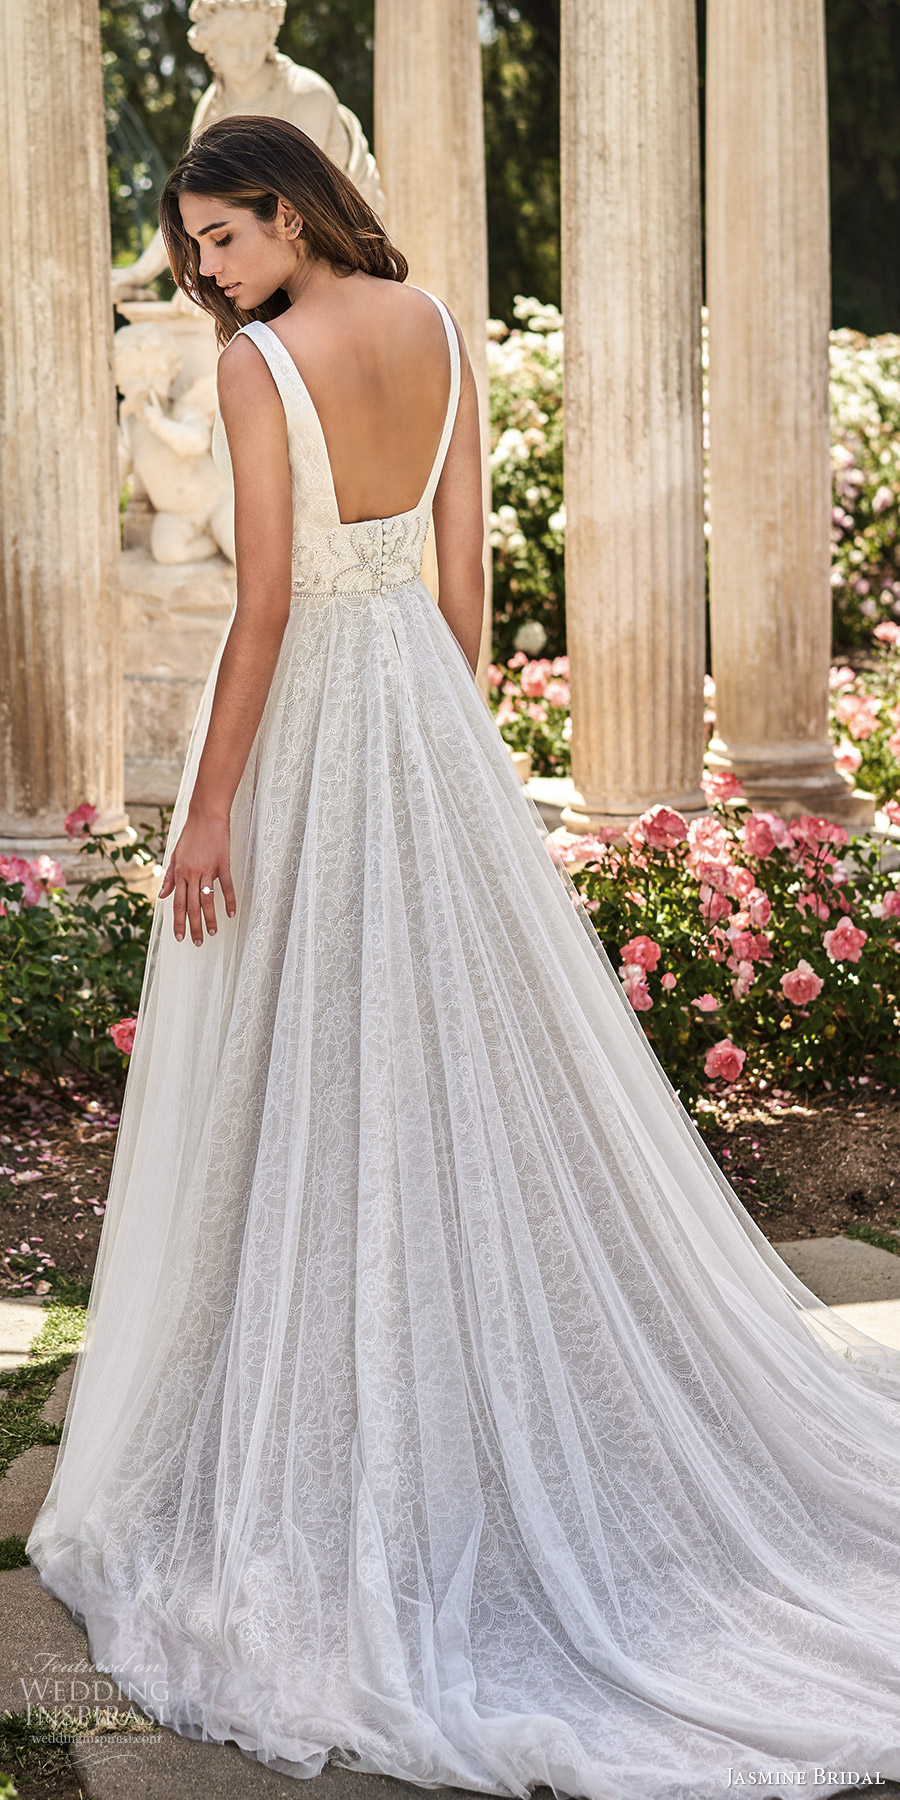 jasmine spring 2020 collection sleeveless thick straps plunging v neckline embellished a line ball gown wedding dress chapel train (4) bv